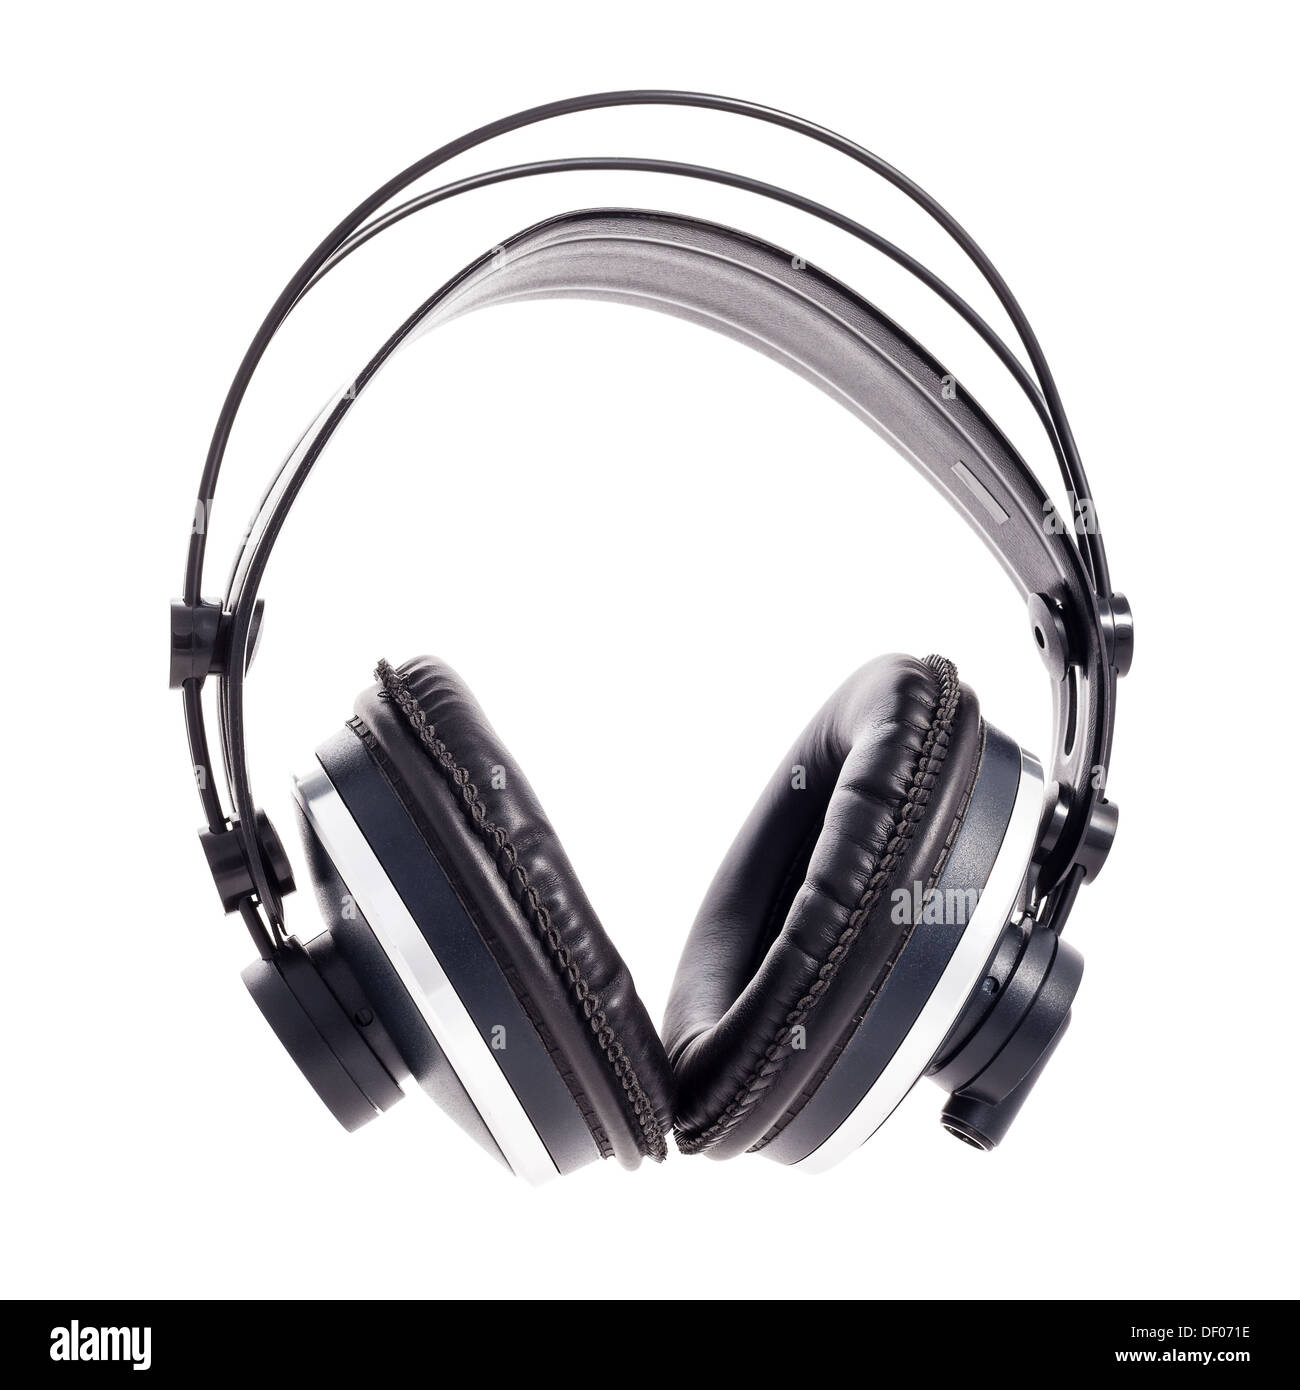 Full-sized, professional headphones against a white background. Stock Photo